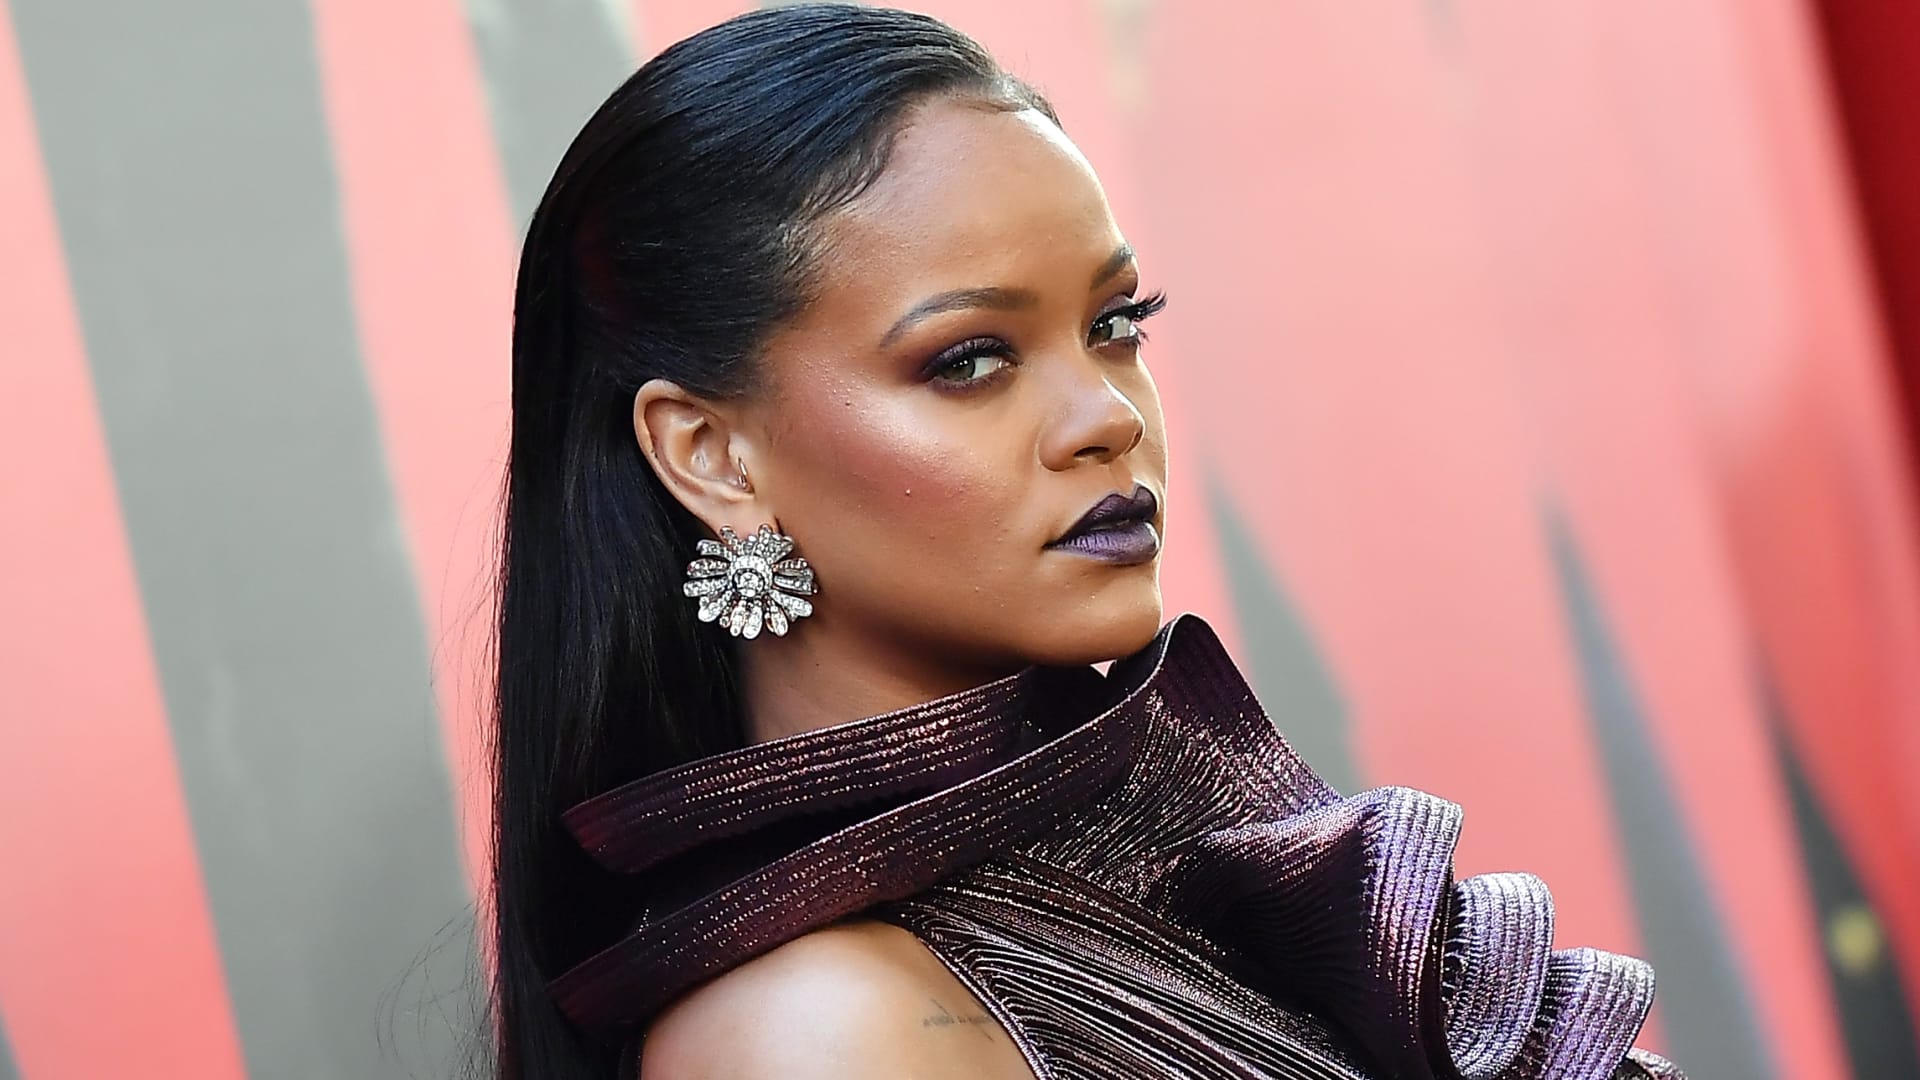 Rihanna makes long-awaited return to music with ‘Black Panther’ sequel